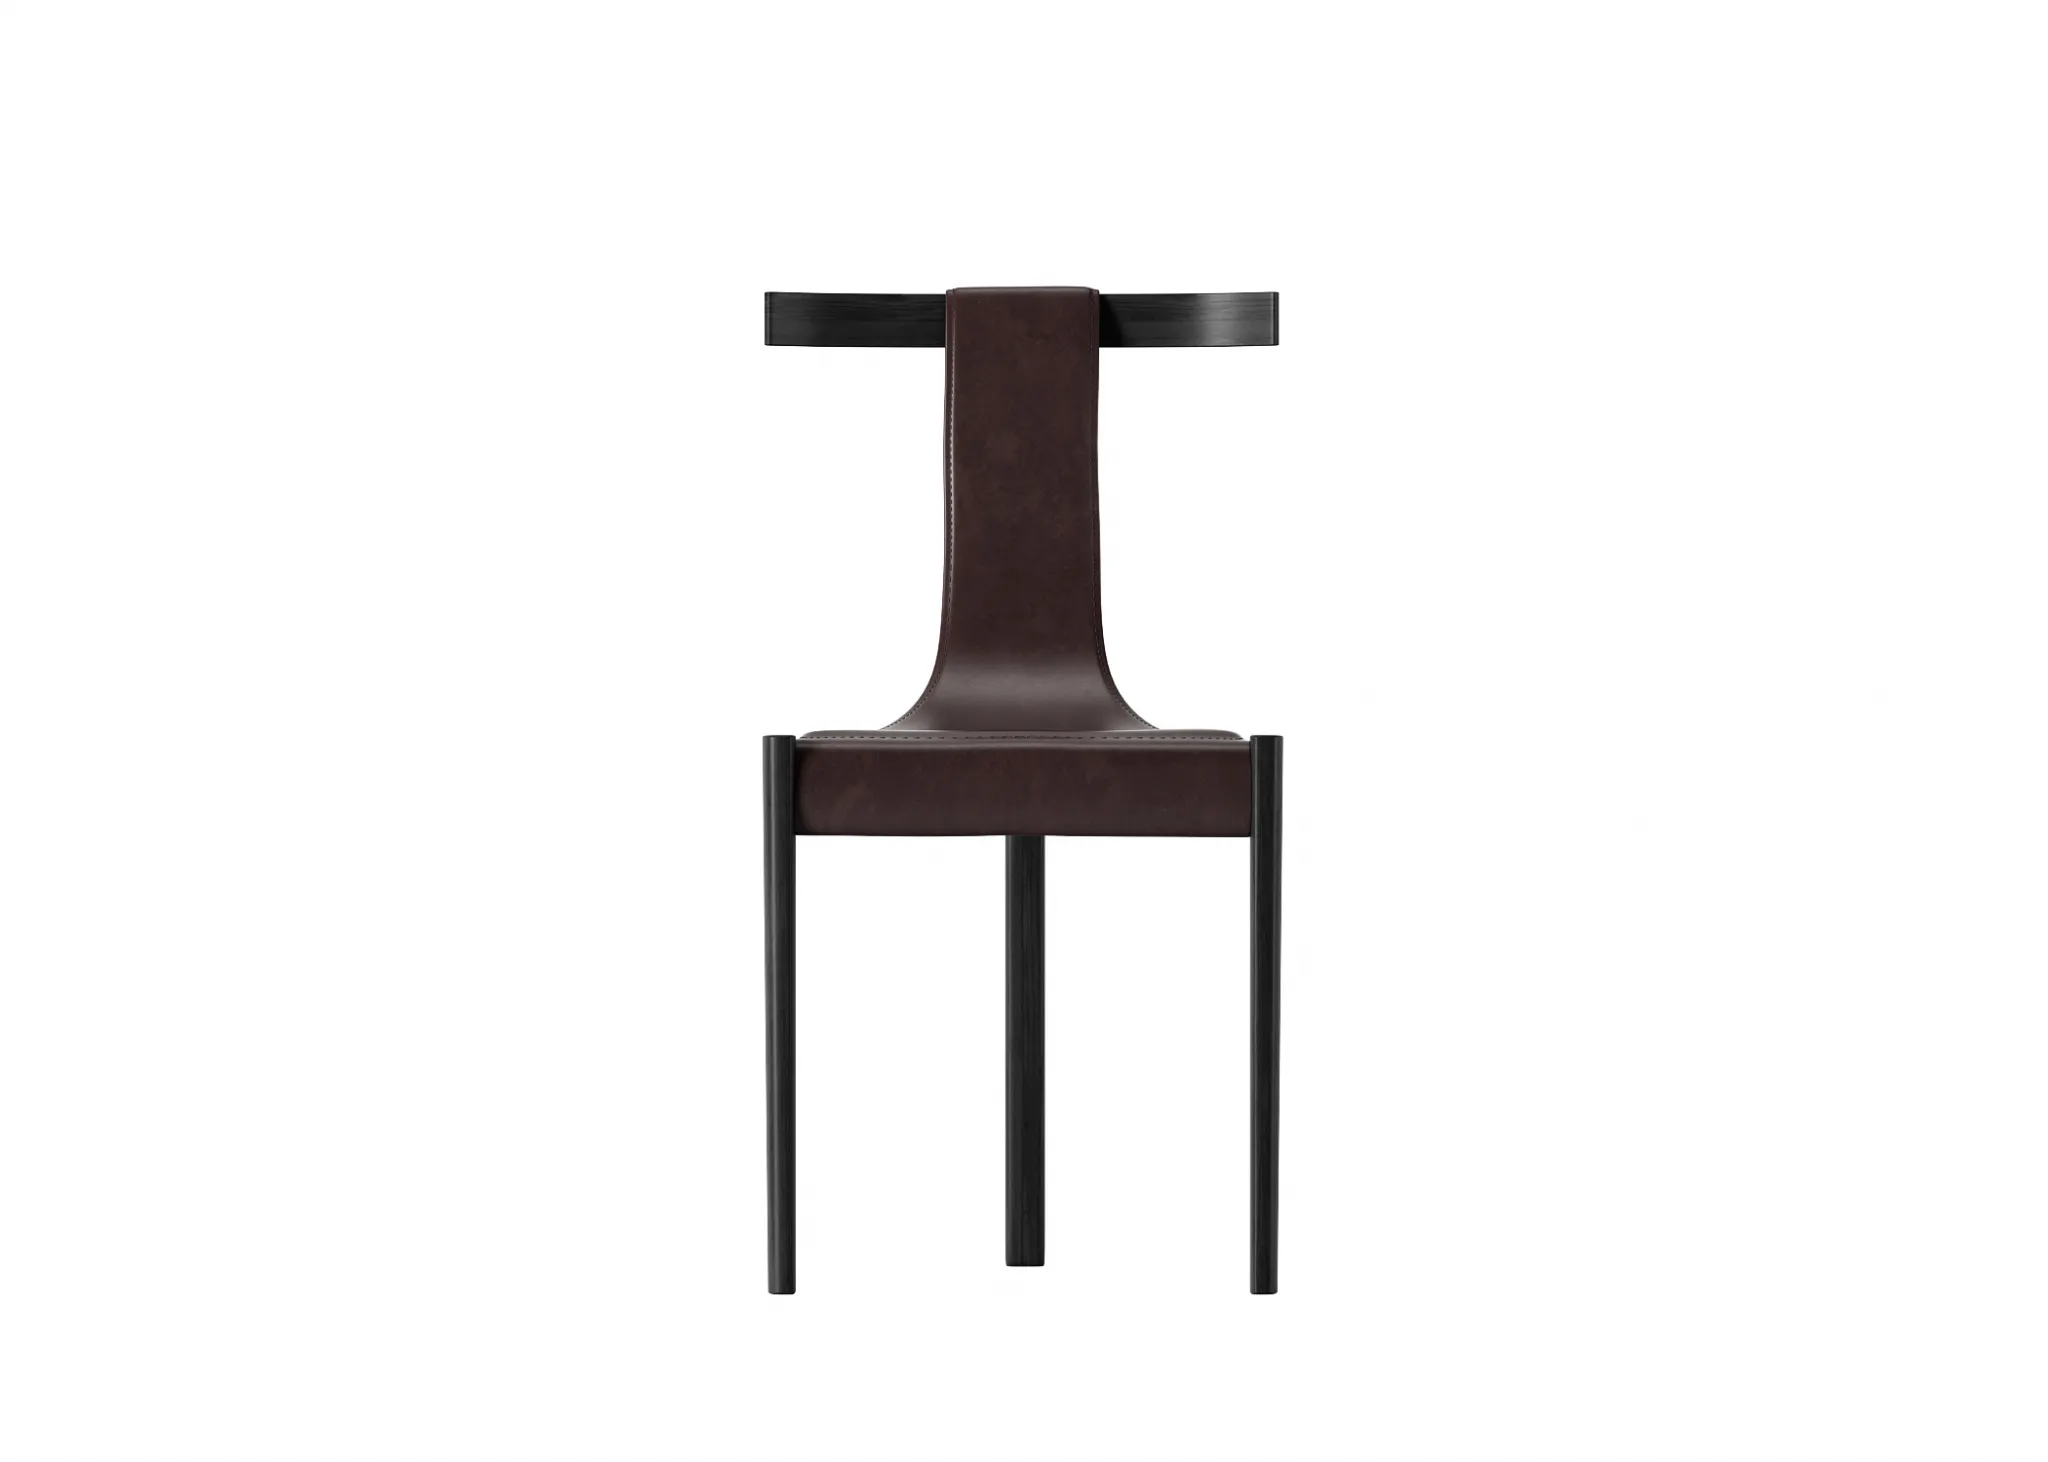 FURNITURE 3D MODELS – CHAIRS – 0304